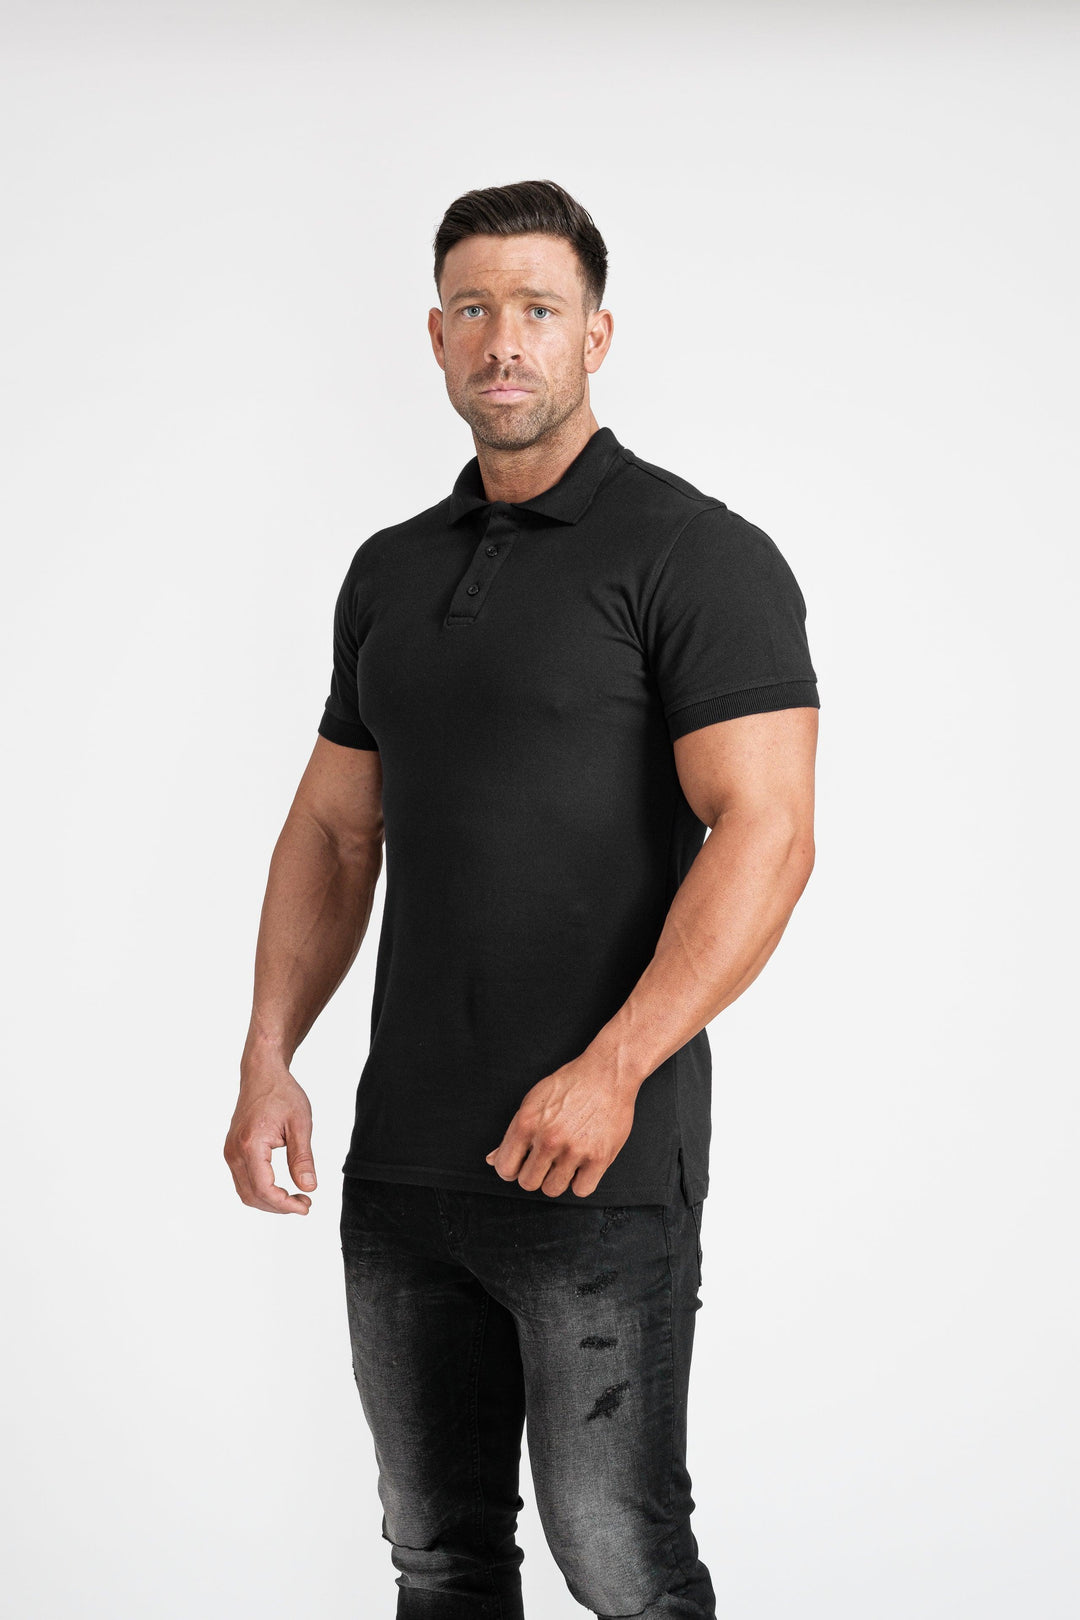 Mens Short Sleeve Muscle Fit Polo Shirt. A Proportionally Fitted and Muscle Fit Polo in Black. The best polo shirts for muscular guys.